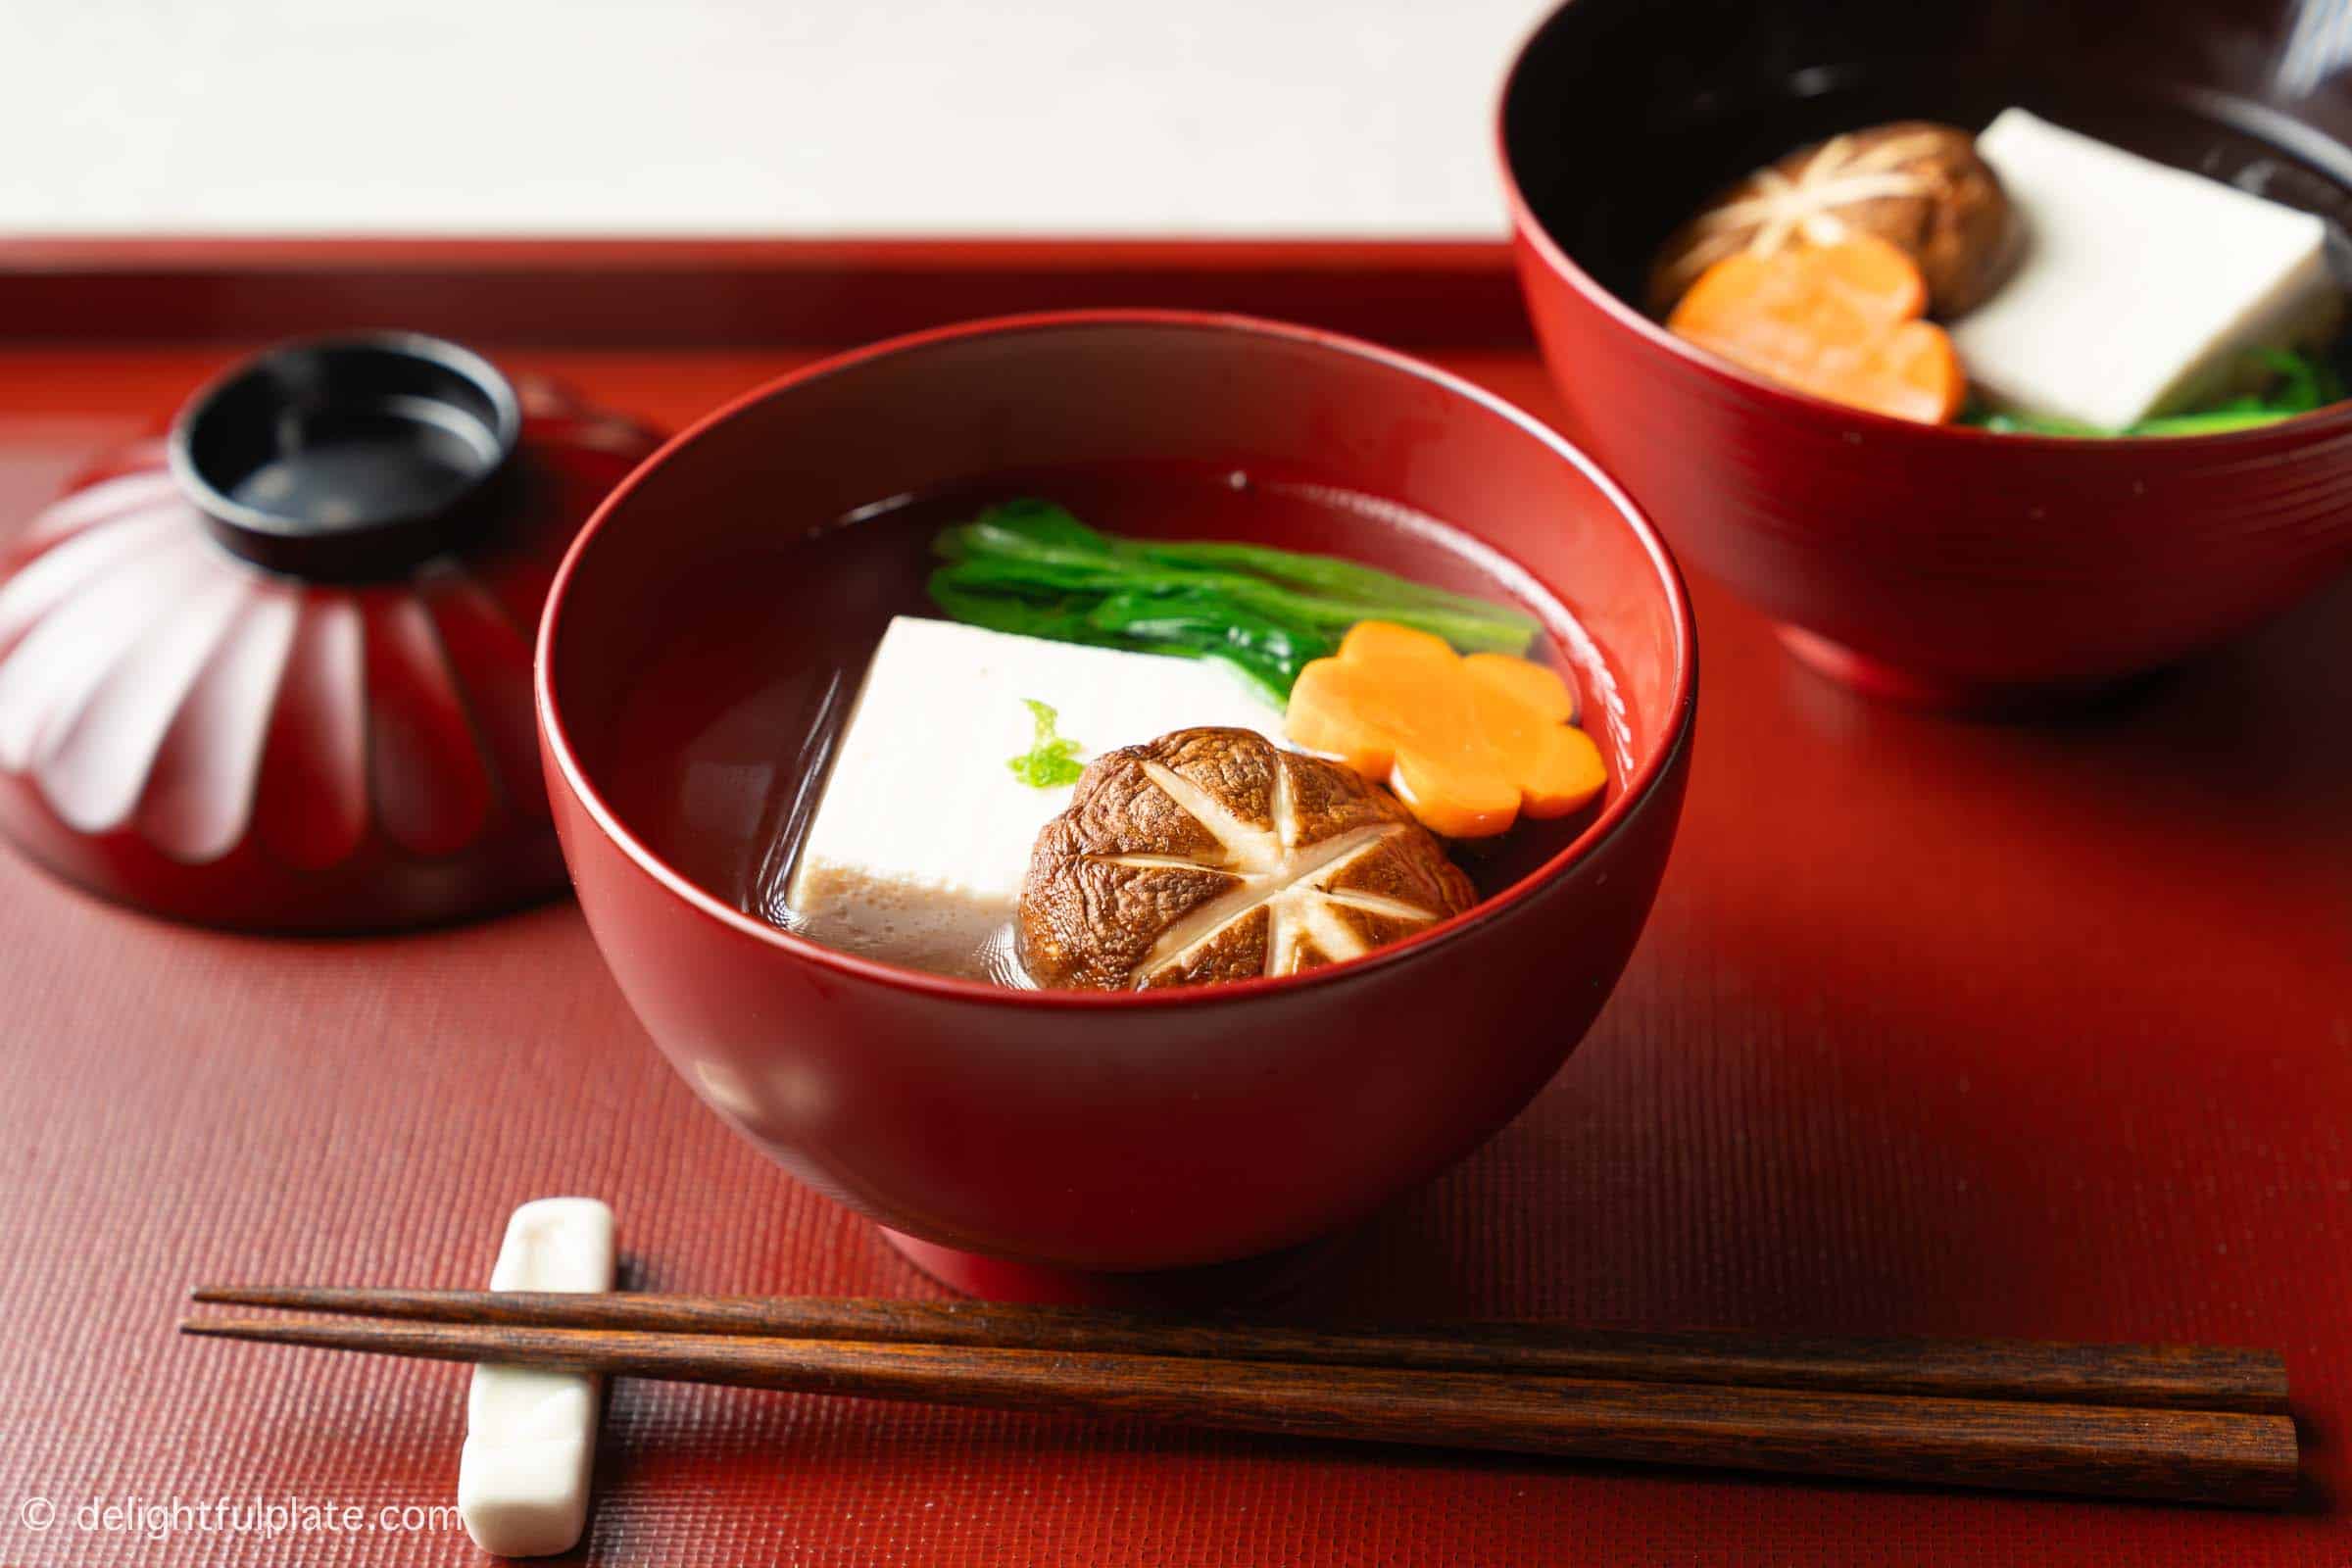 two bowl of suimono soups on a tray.